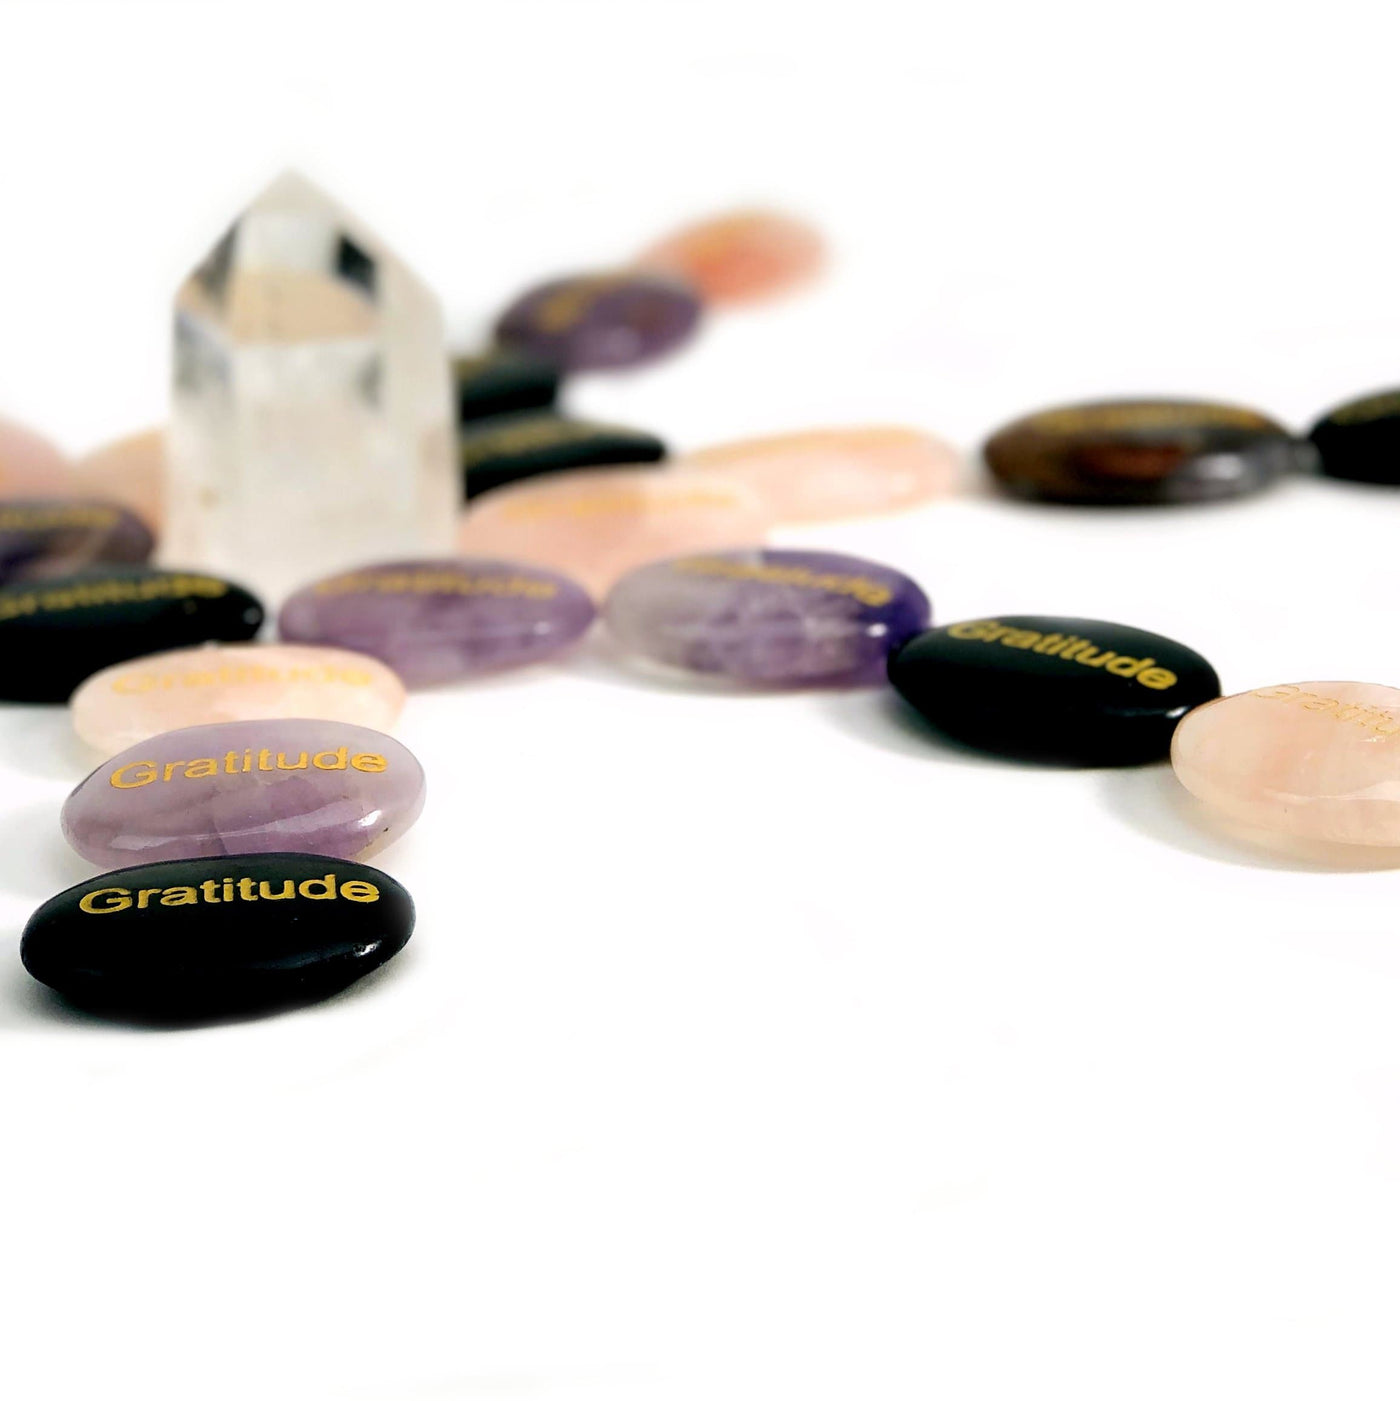 Various "Gratitude" Pocket Palm Stones laid out on a white surface.